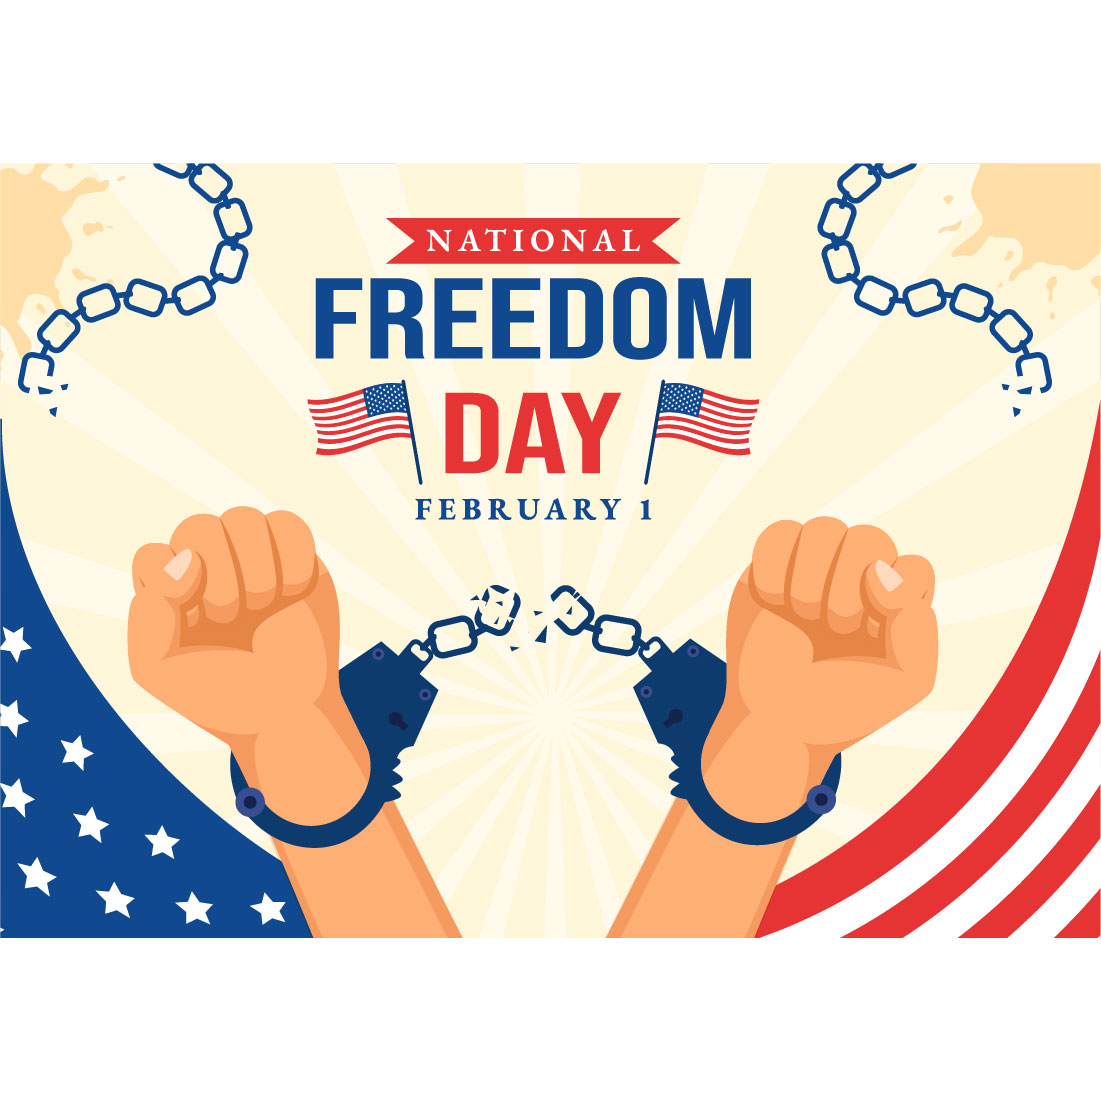 16 National Freedom Day Illustration cover image.